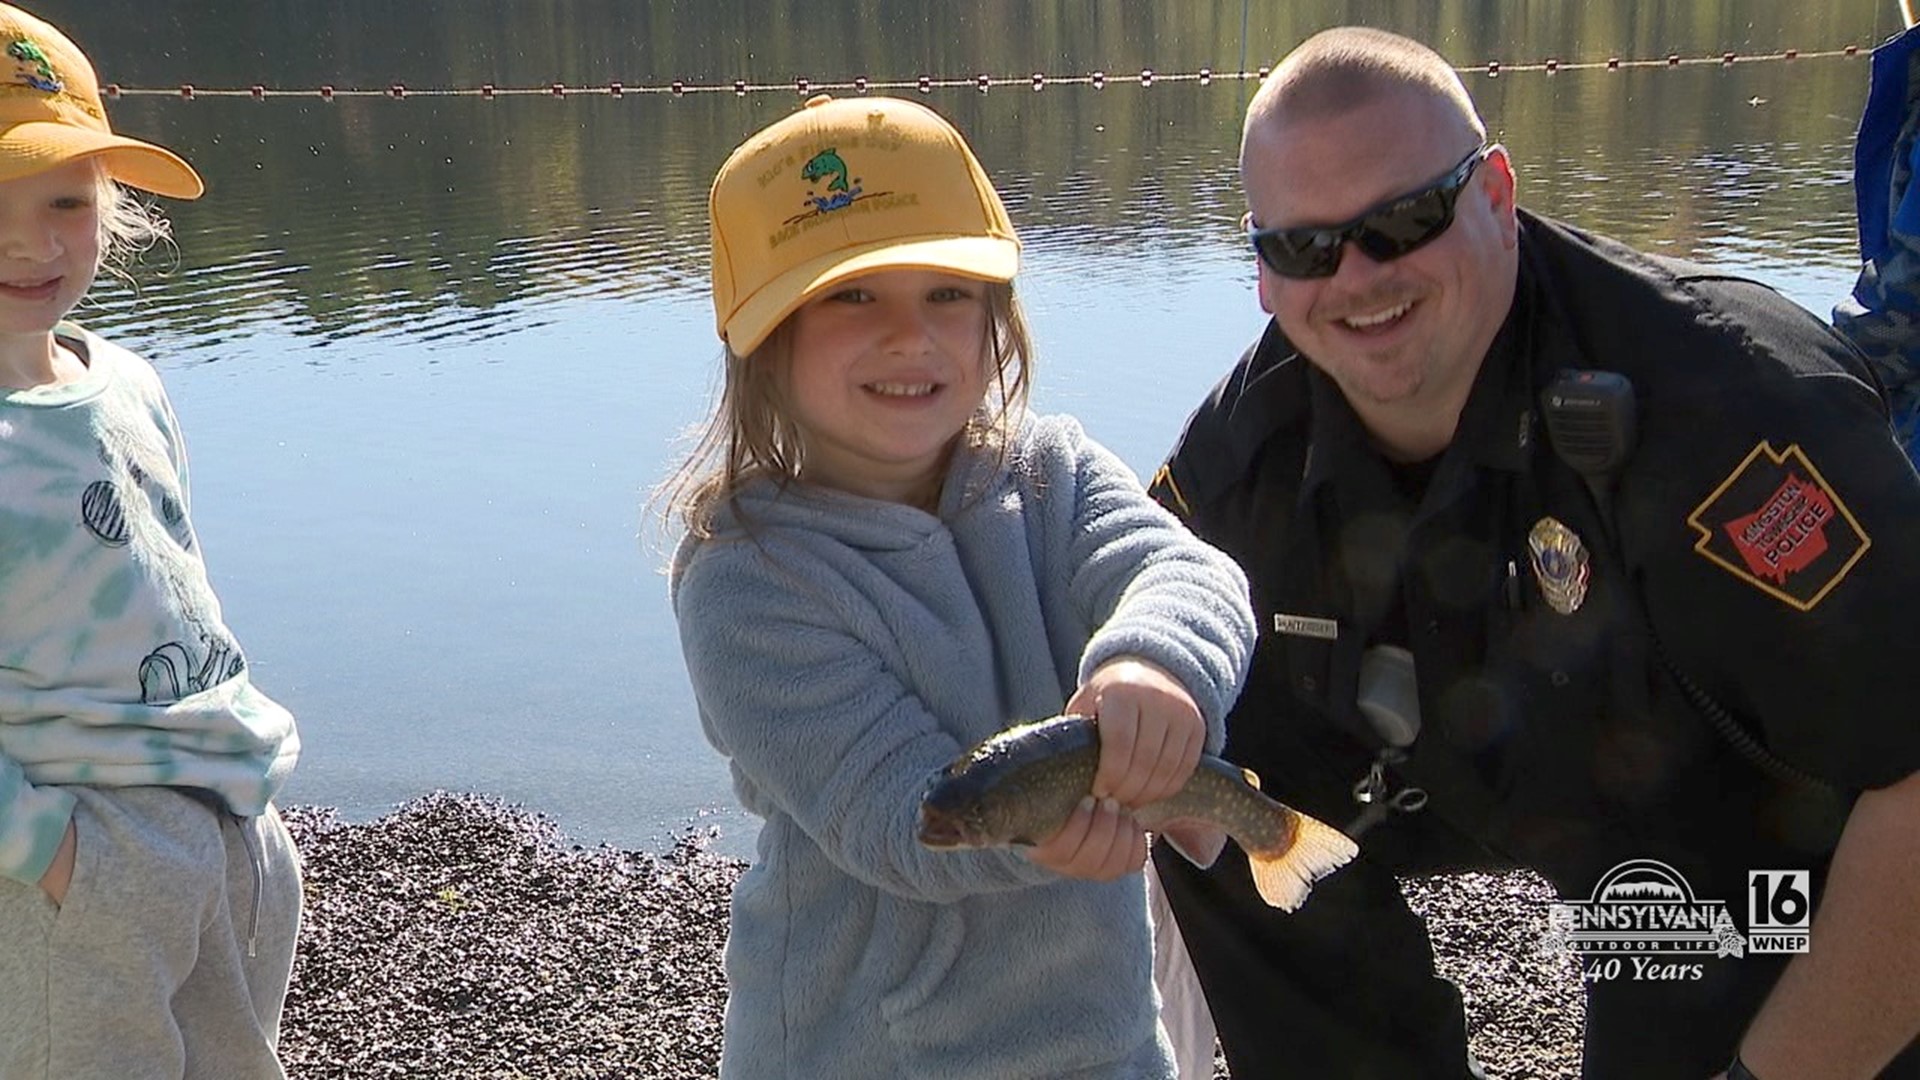 Kids getting to know their local law enforcement through fishing.